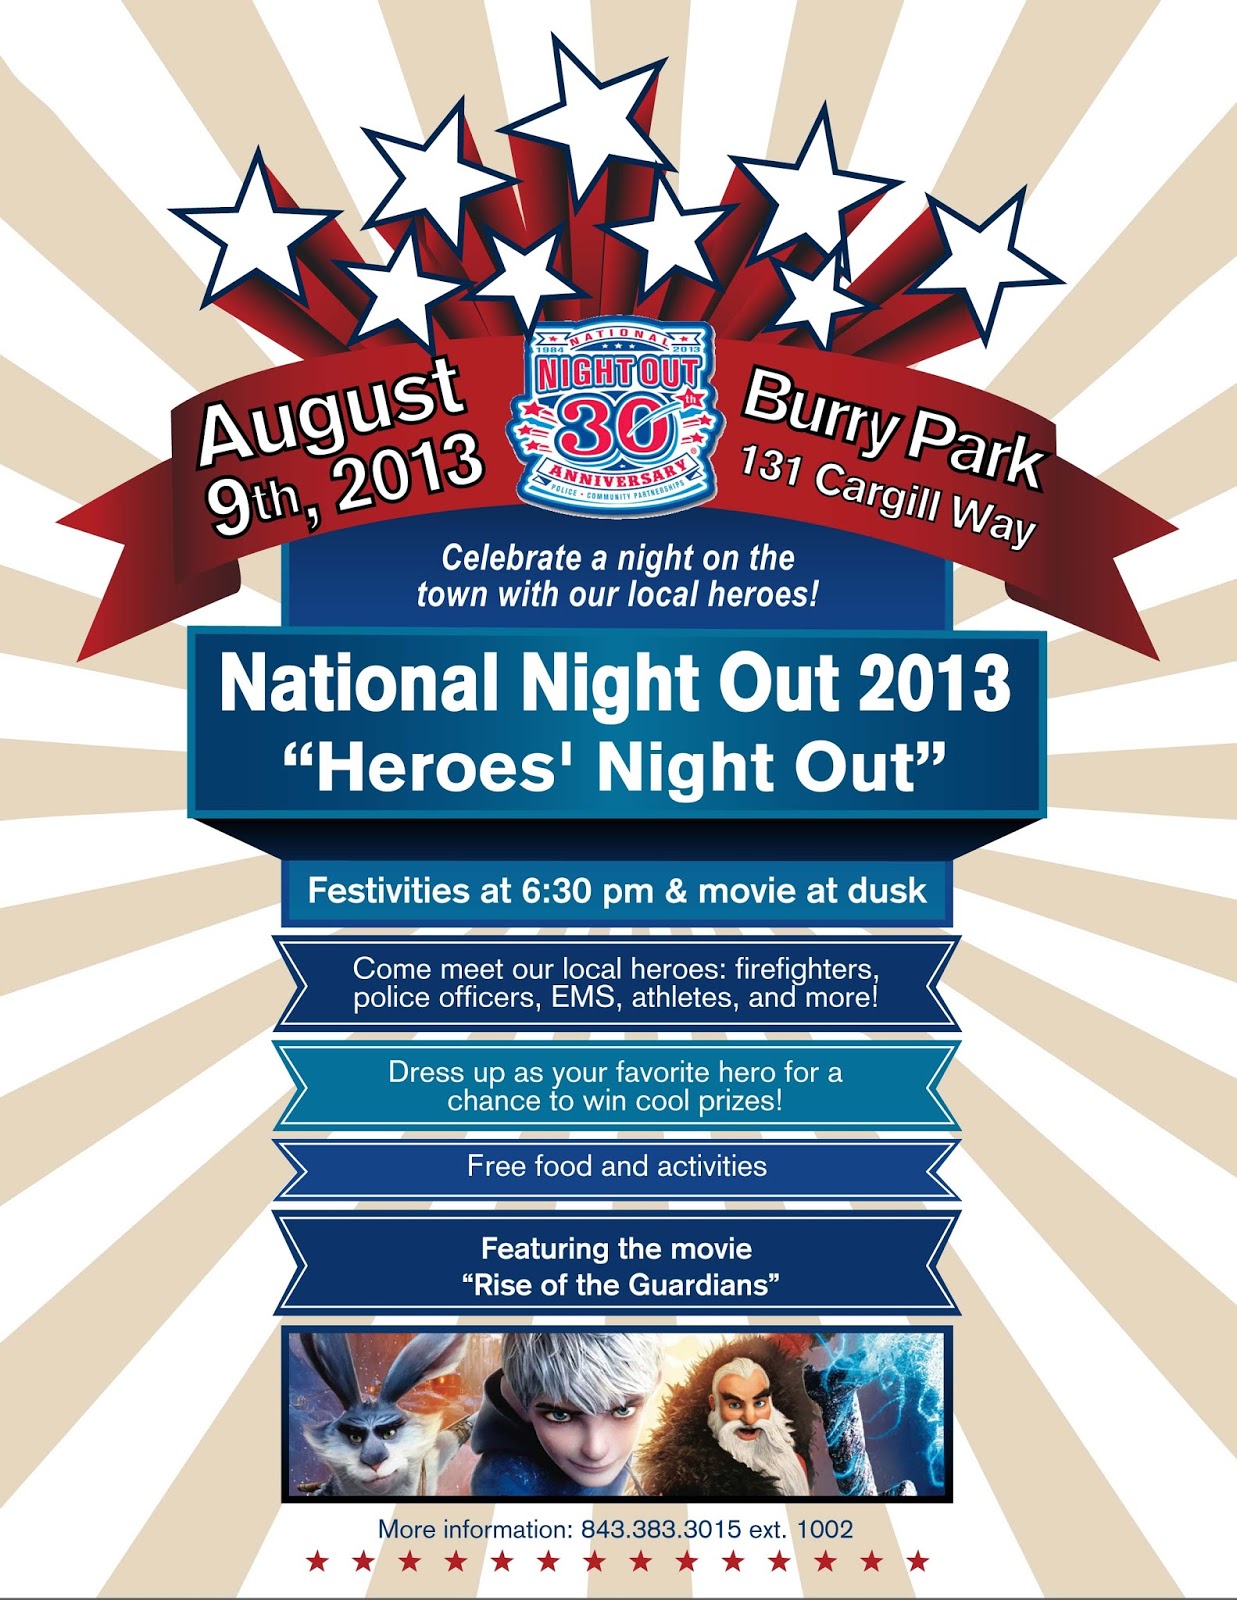 national-night-out-flyer-template